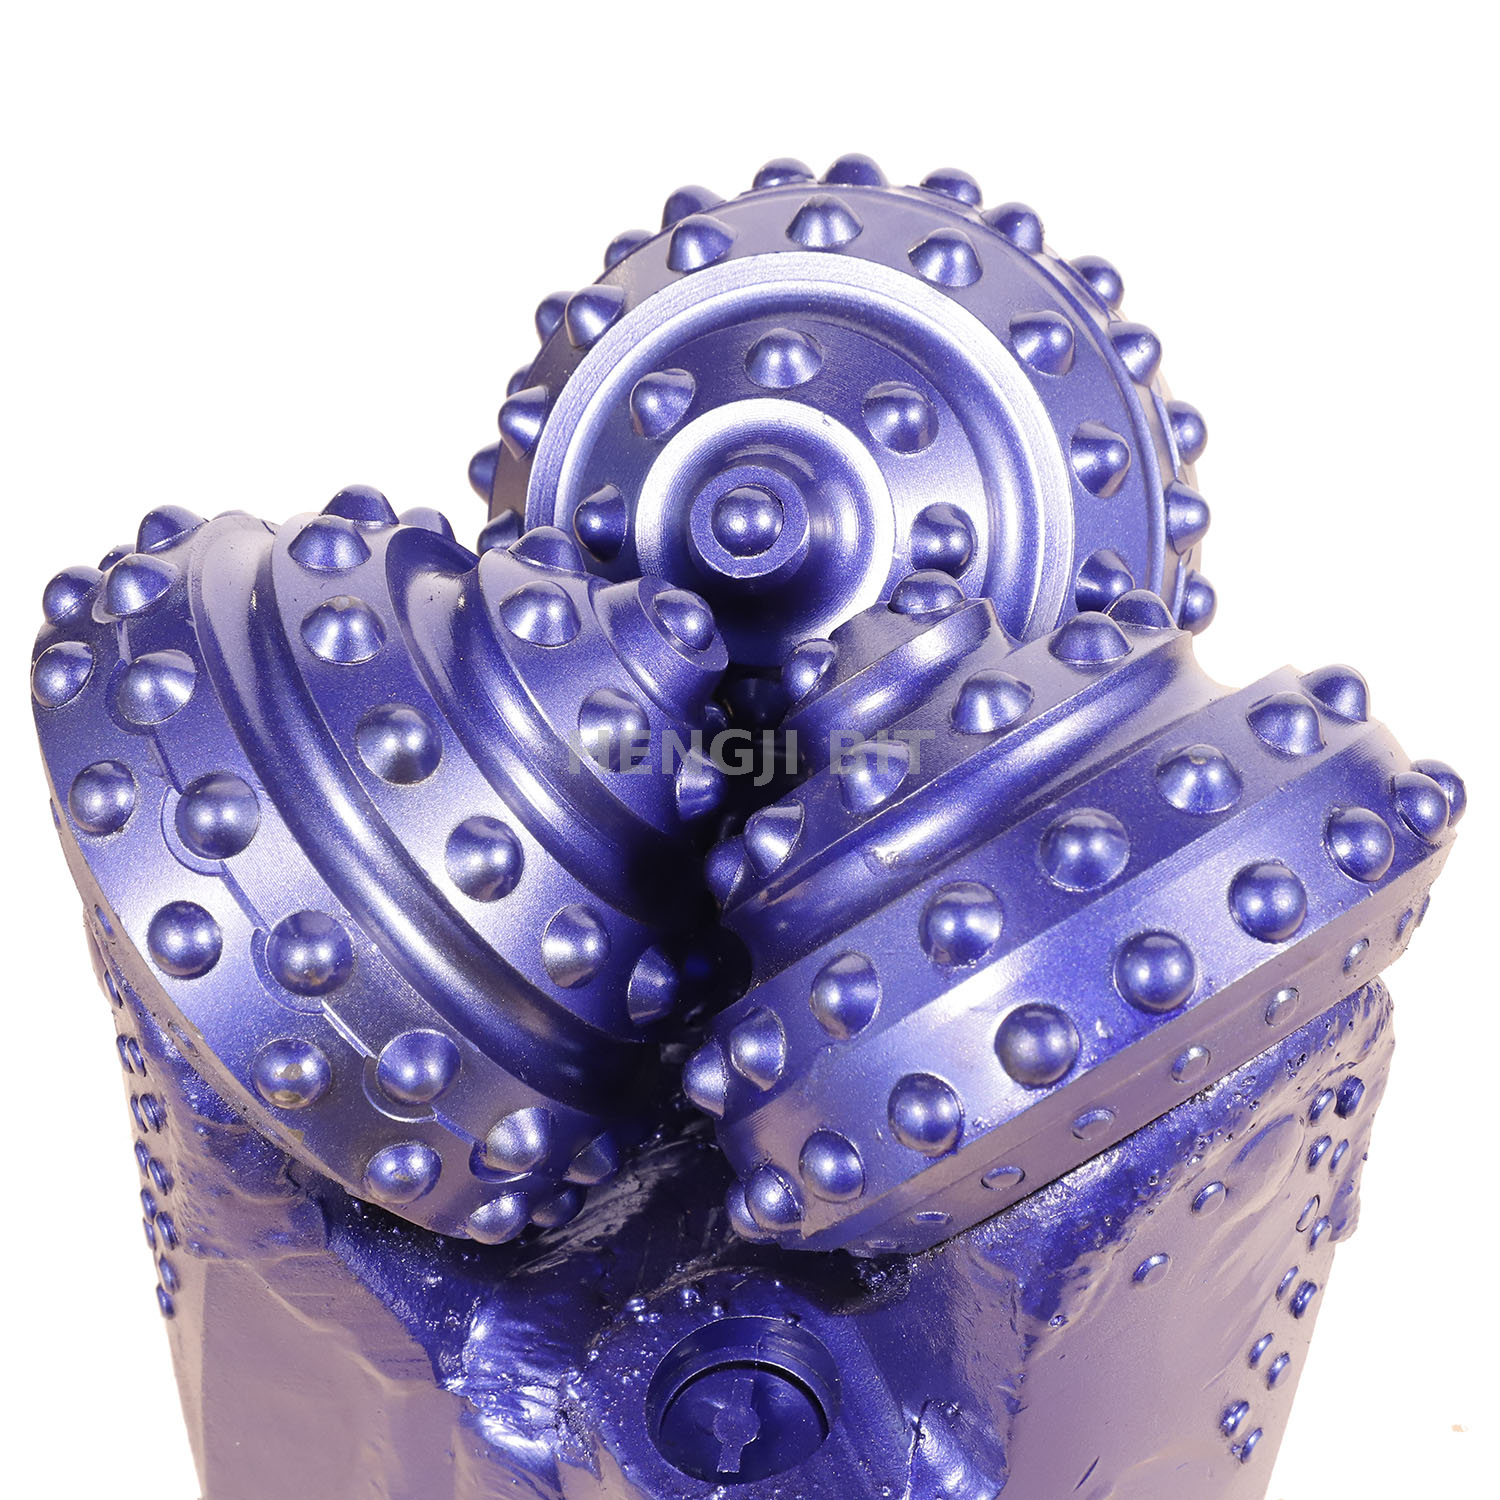 New 6 3/4''171mm Iadc Code 637 Tricone Drill Bit roller bit for Hard Rock Drilling Formations